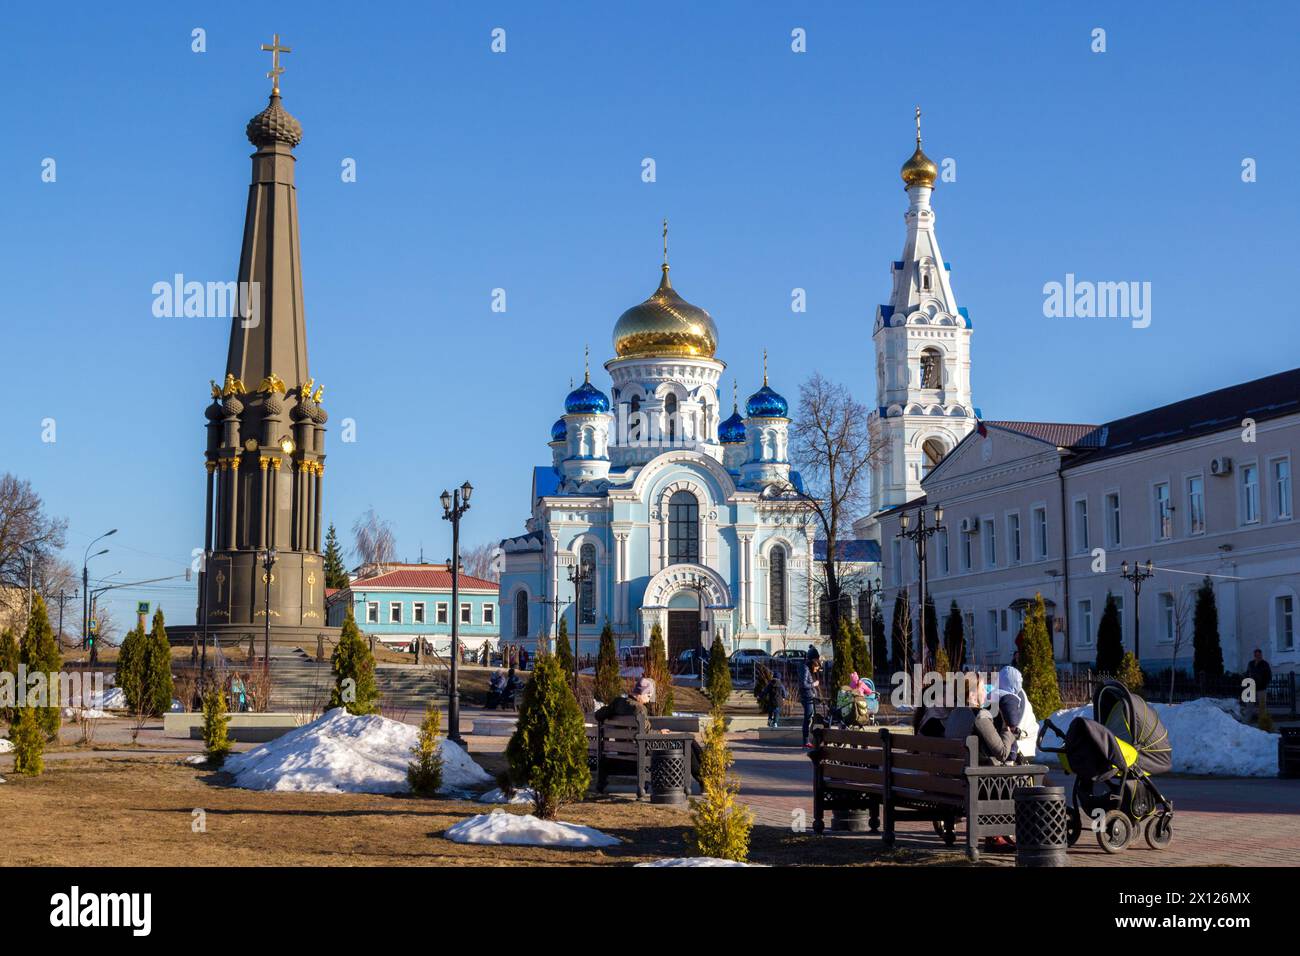 Maloyaroslavets, Russia - April 2018: The central square of the city of Maloyaroslavets on a clear sunny day Stock Photo